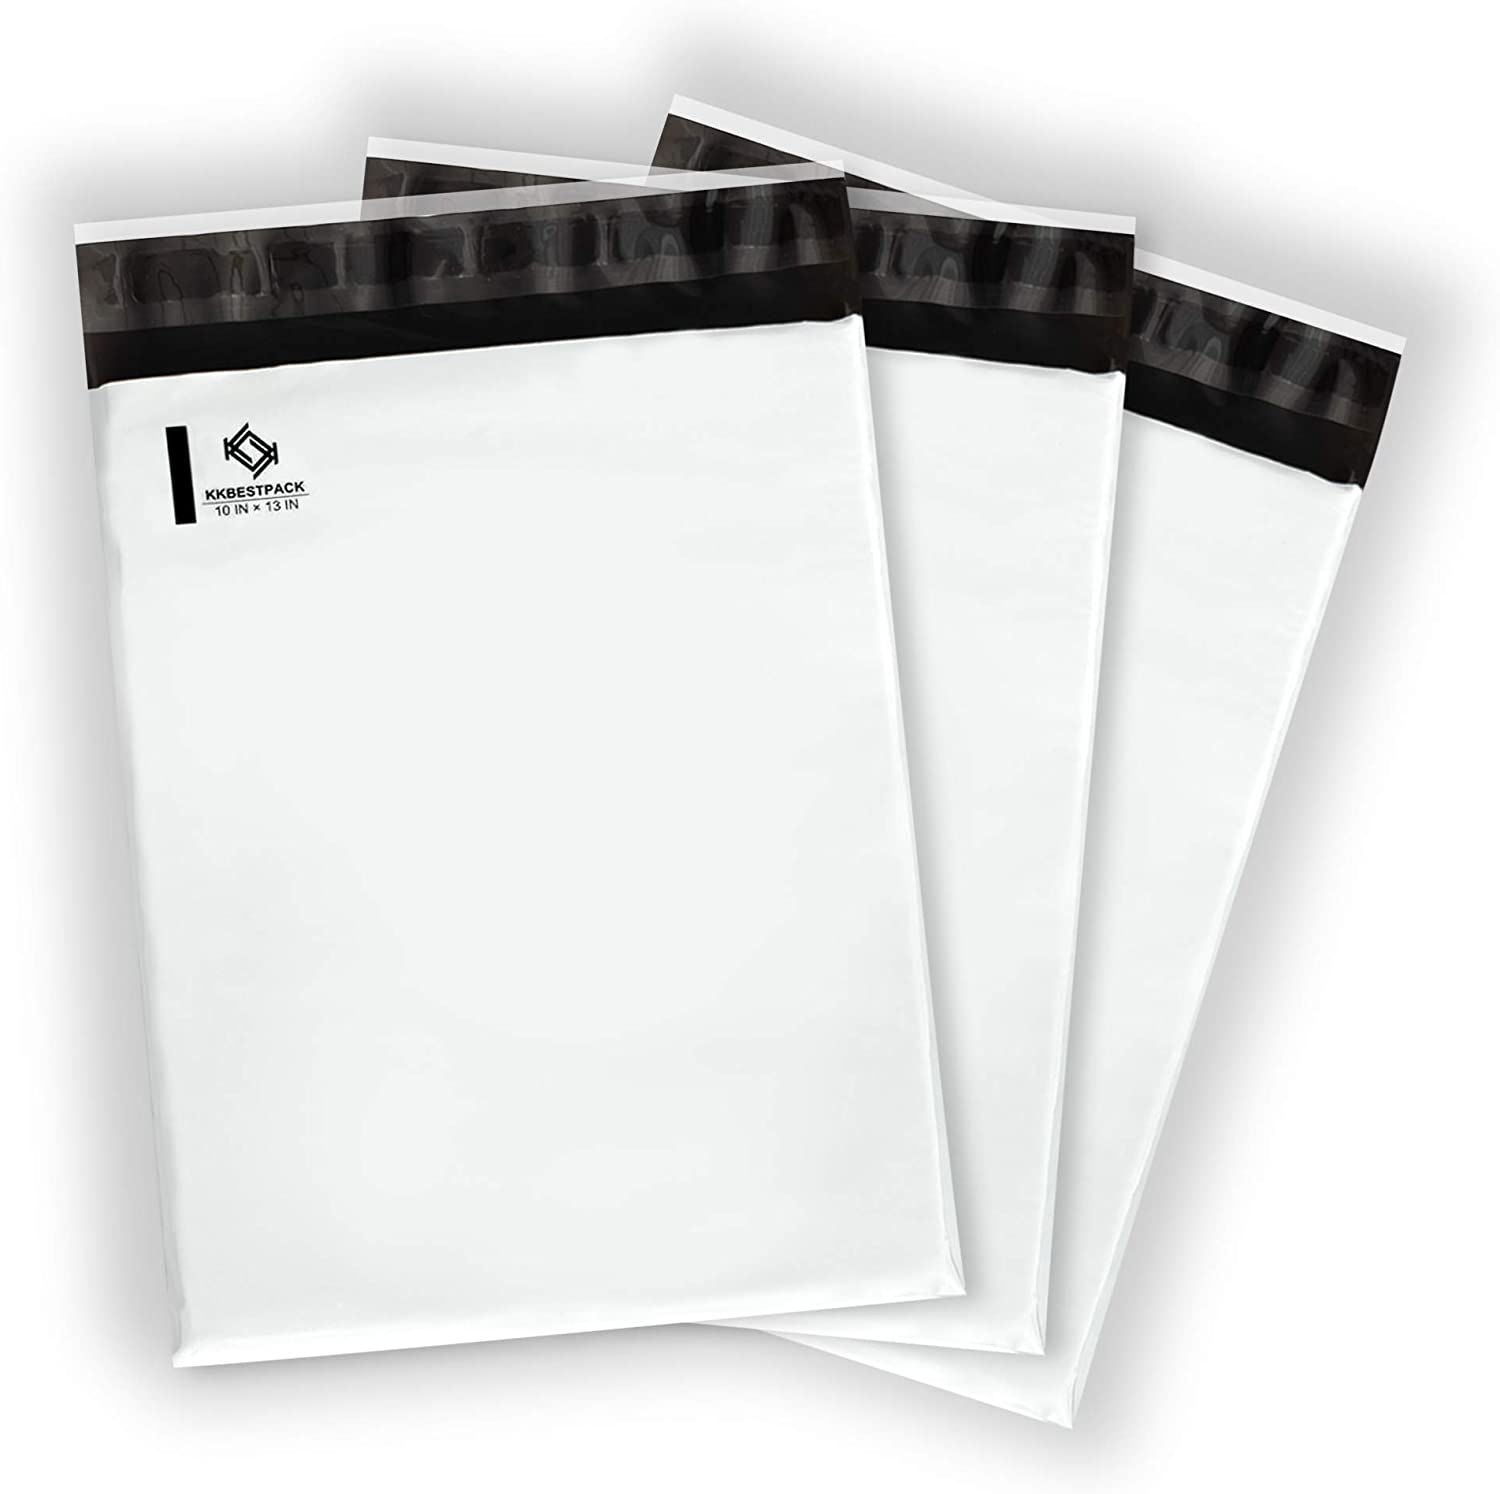 KKBESTPACK White Silicone Poly Mailers, 100-Pack